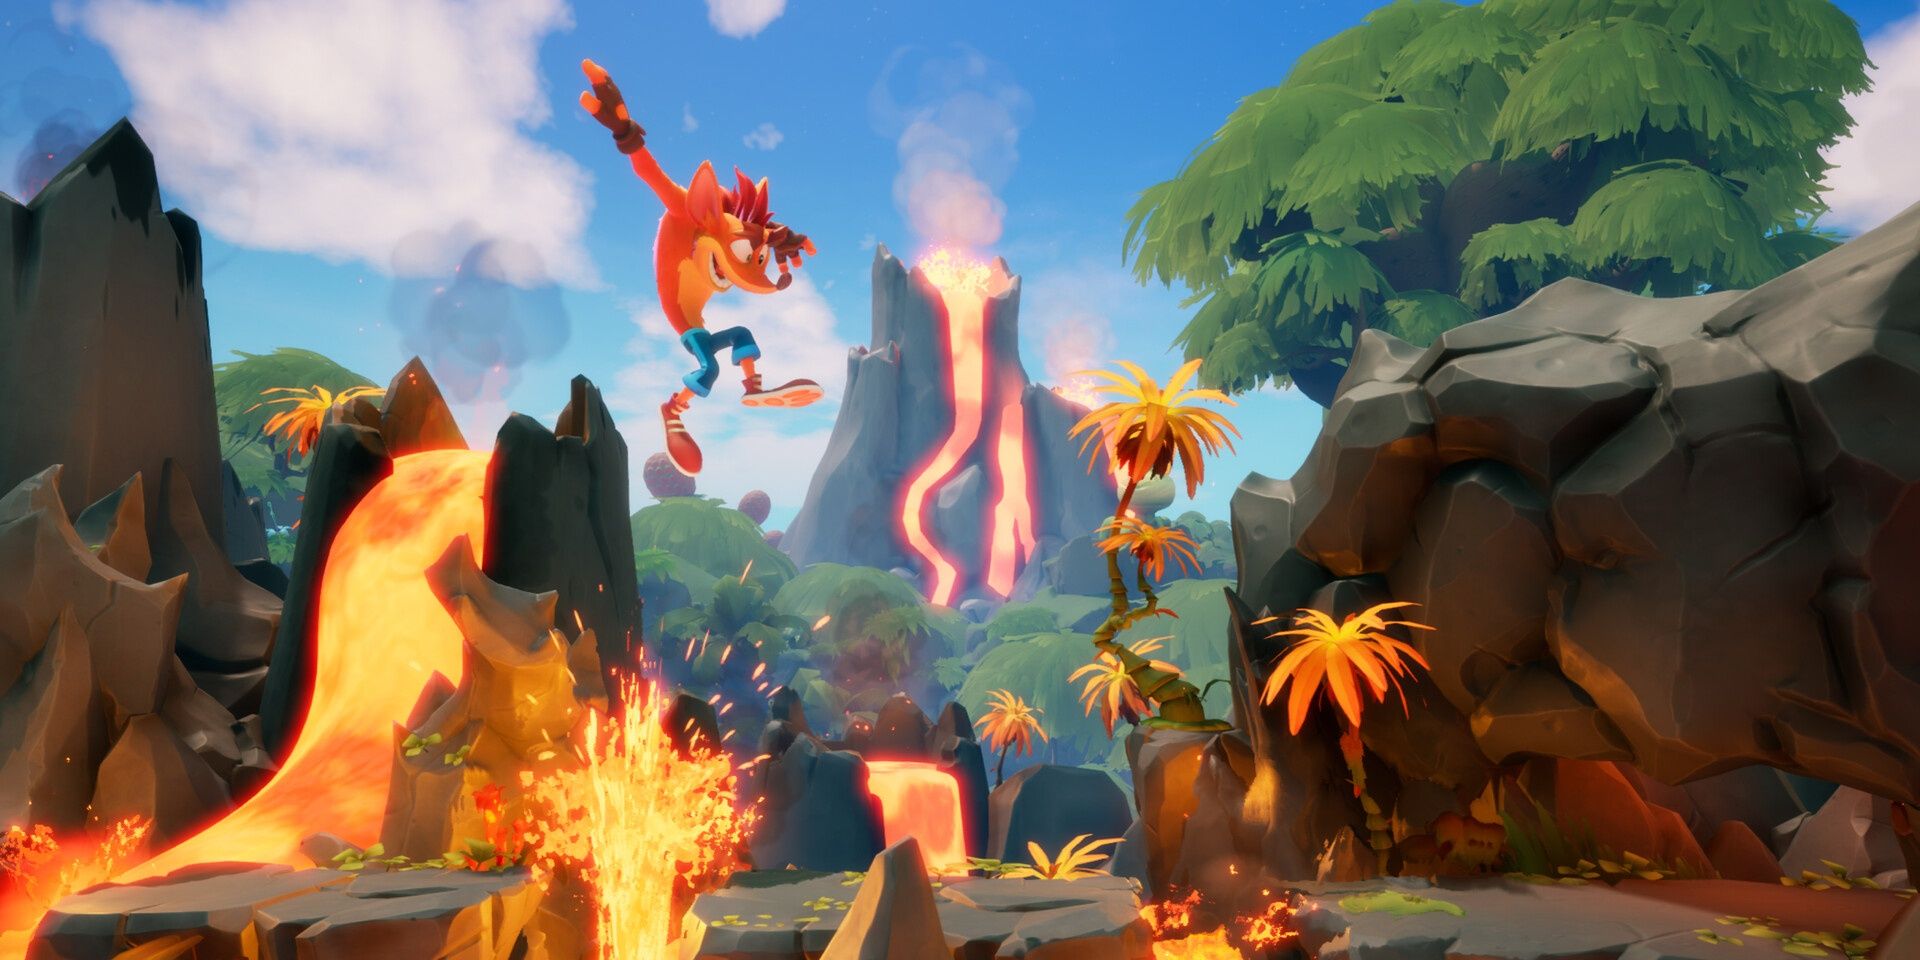 Crash jumping over a lava spout in Crash Bandicoot 4: It's About Time